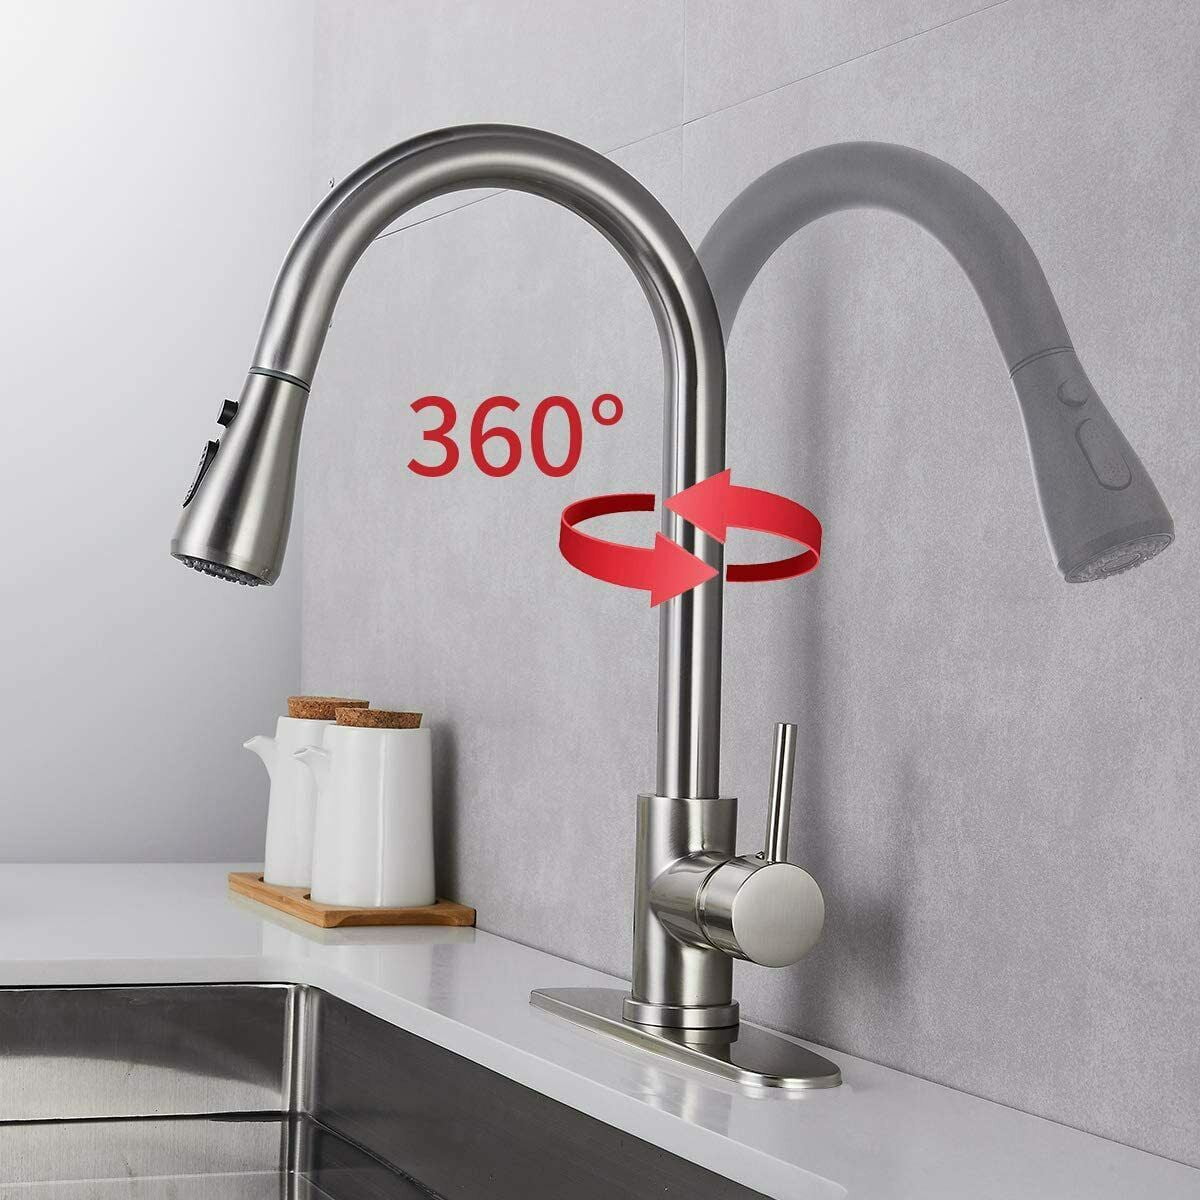 Bathroom Kitchen Sink Faucet Mixer Tap Brushed Nickel Wall Mount Stainless Steel